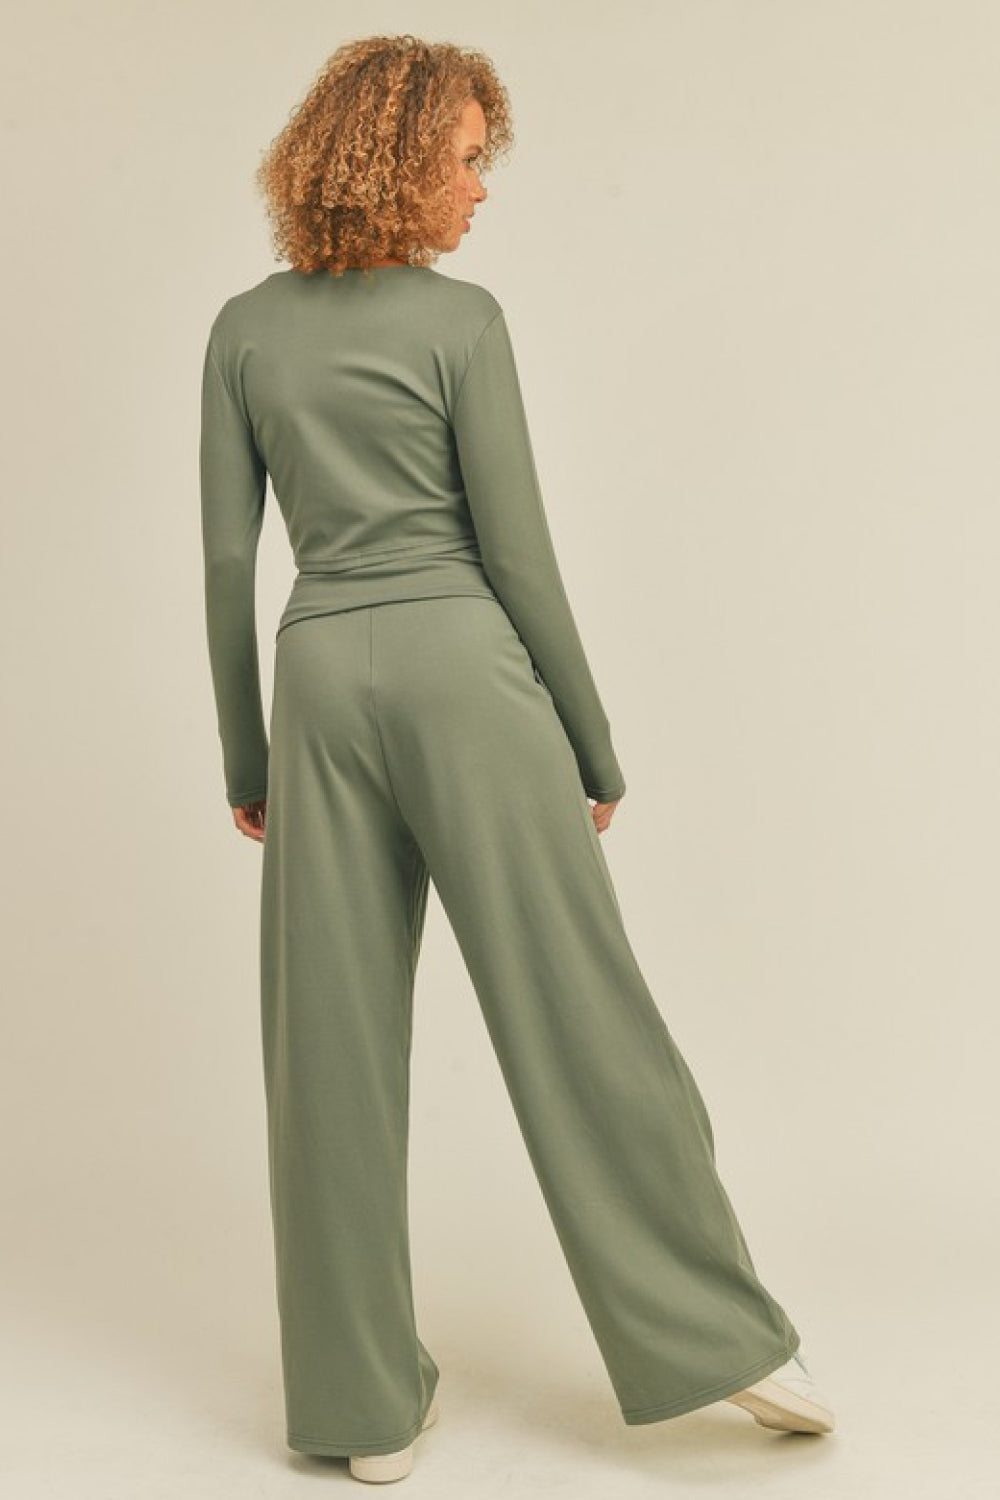 Kimberly C V-Neck Buttoned Top and Wide Waistband Wide Leg Pants Set